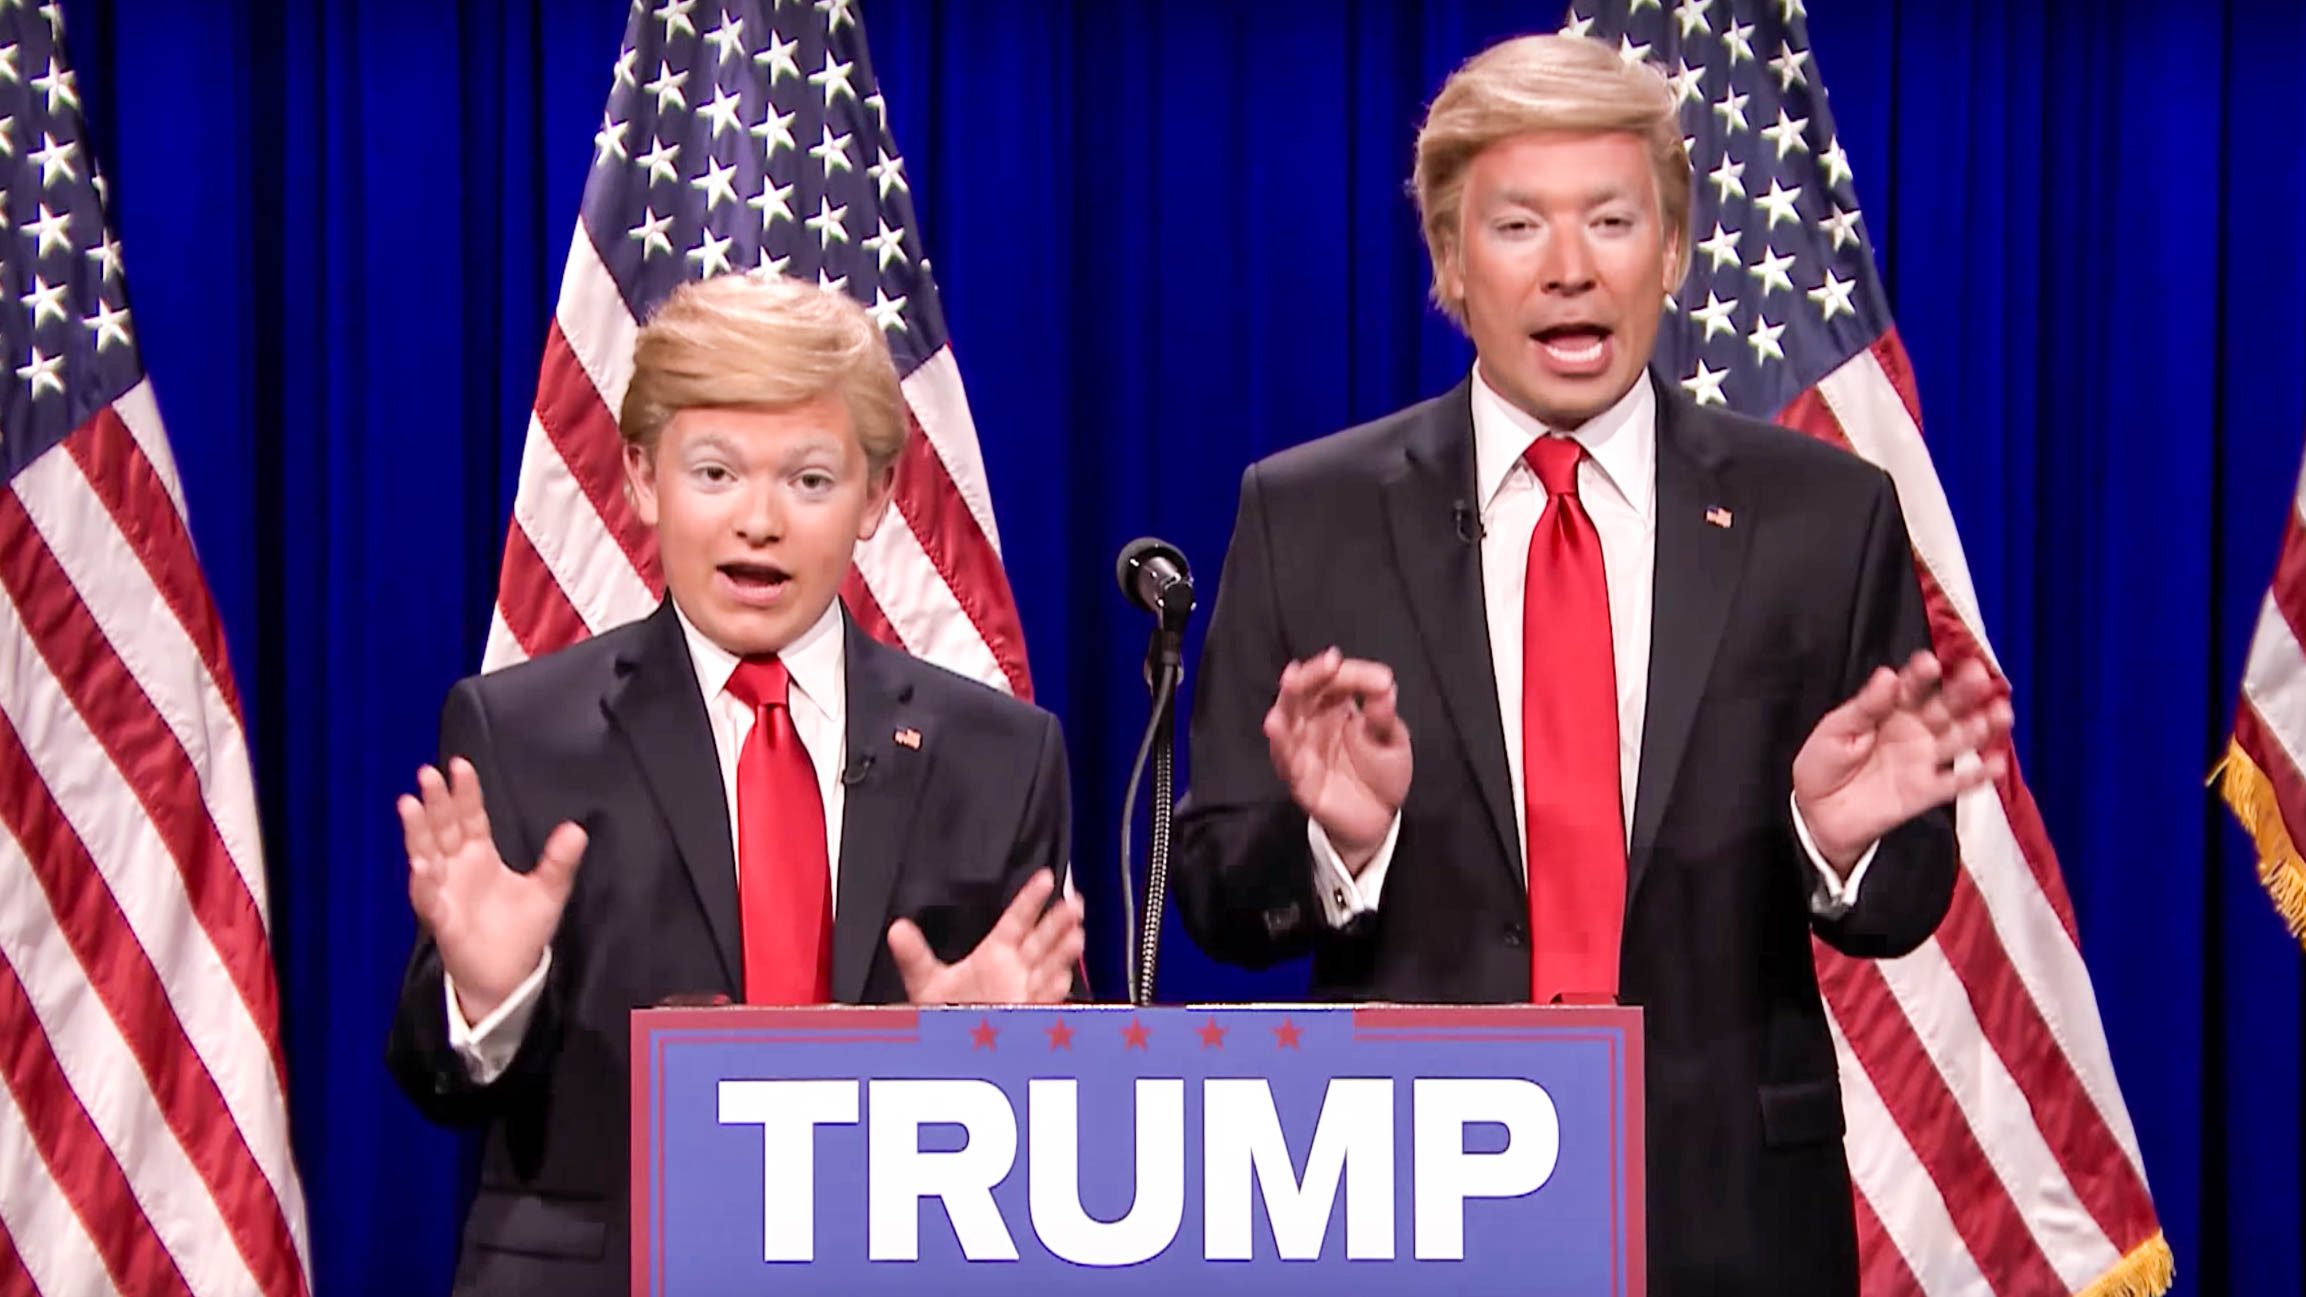 WATCH: Jimmy Fallon, teenager are spot on as Donald Trump